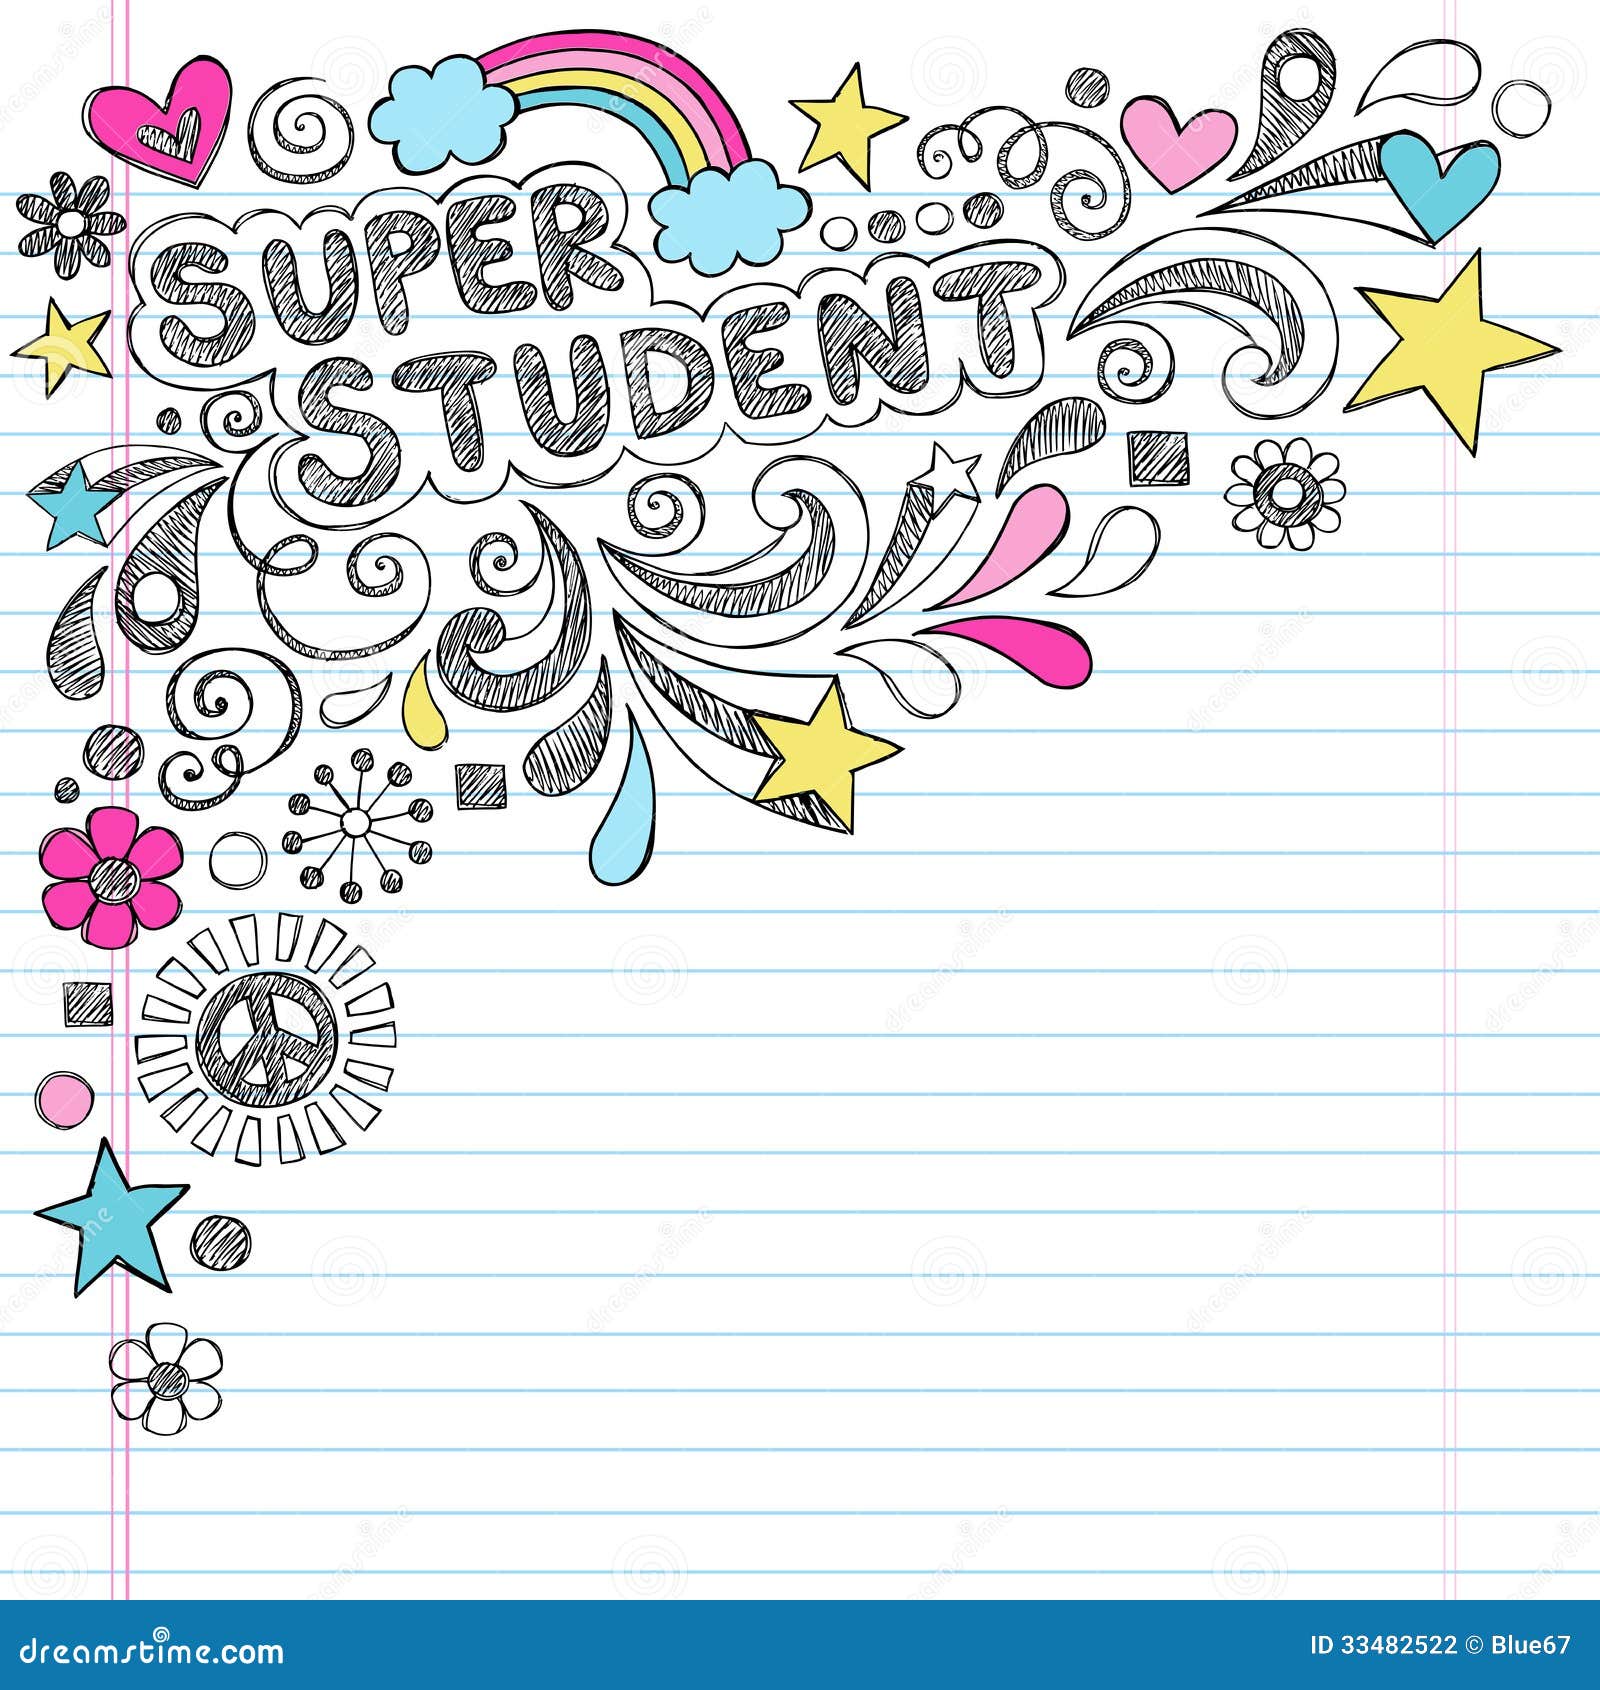 Super Student Back To School Sketchy Doodles Vecto Stock Photography - Image: 33482522